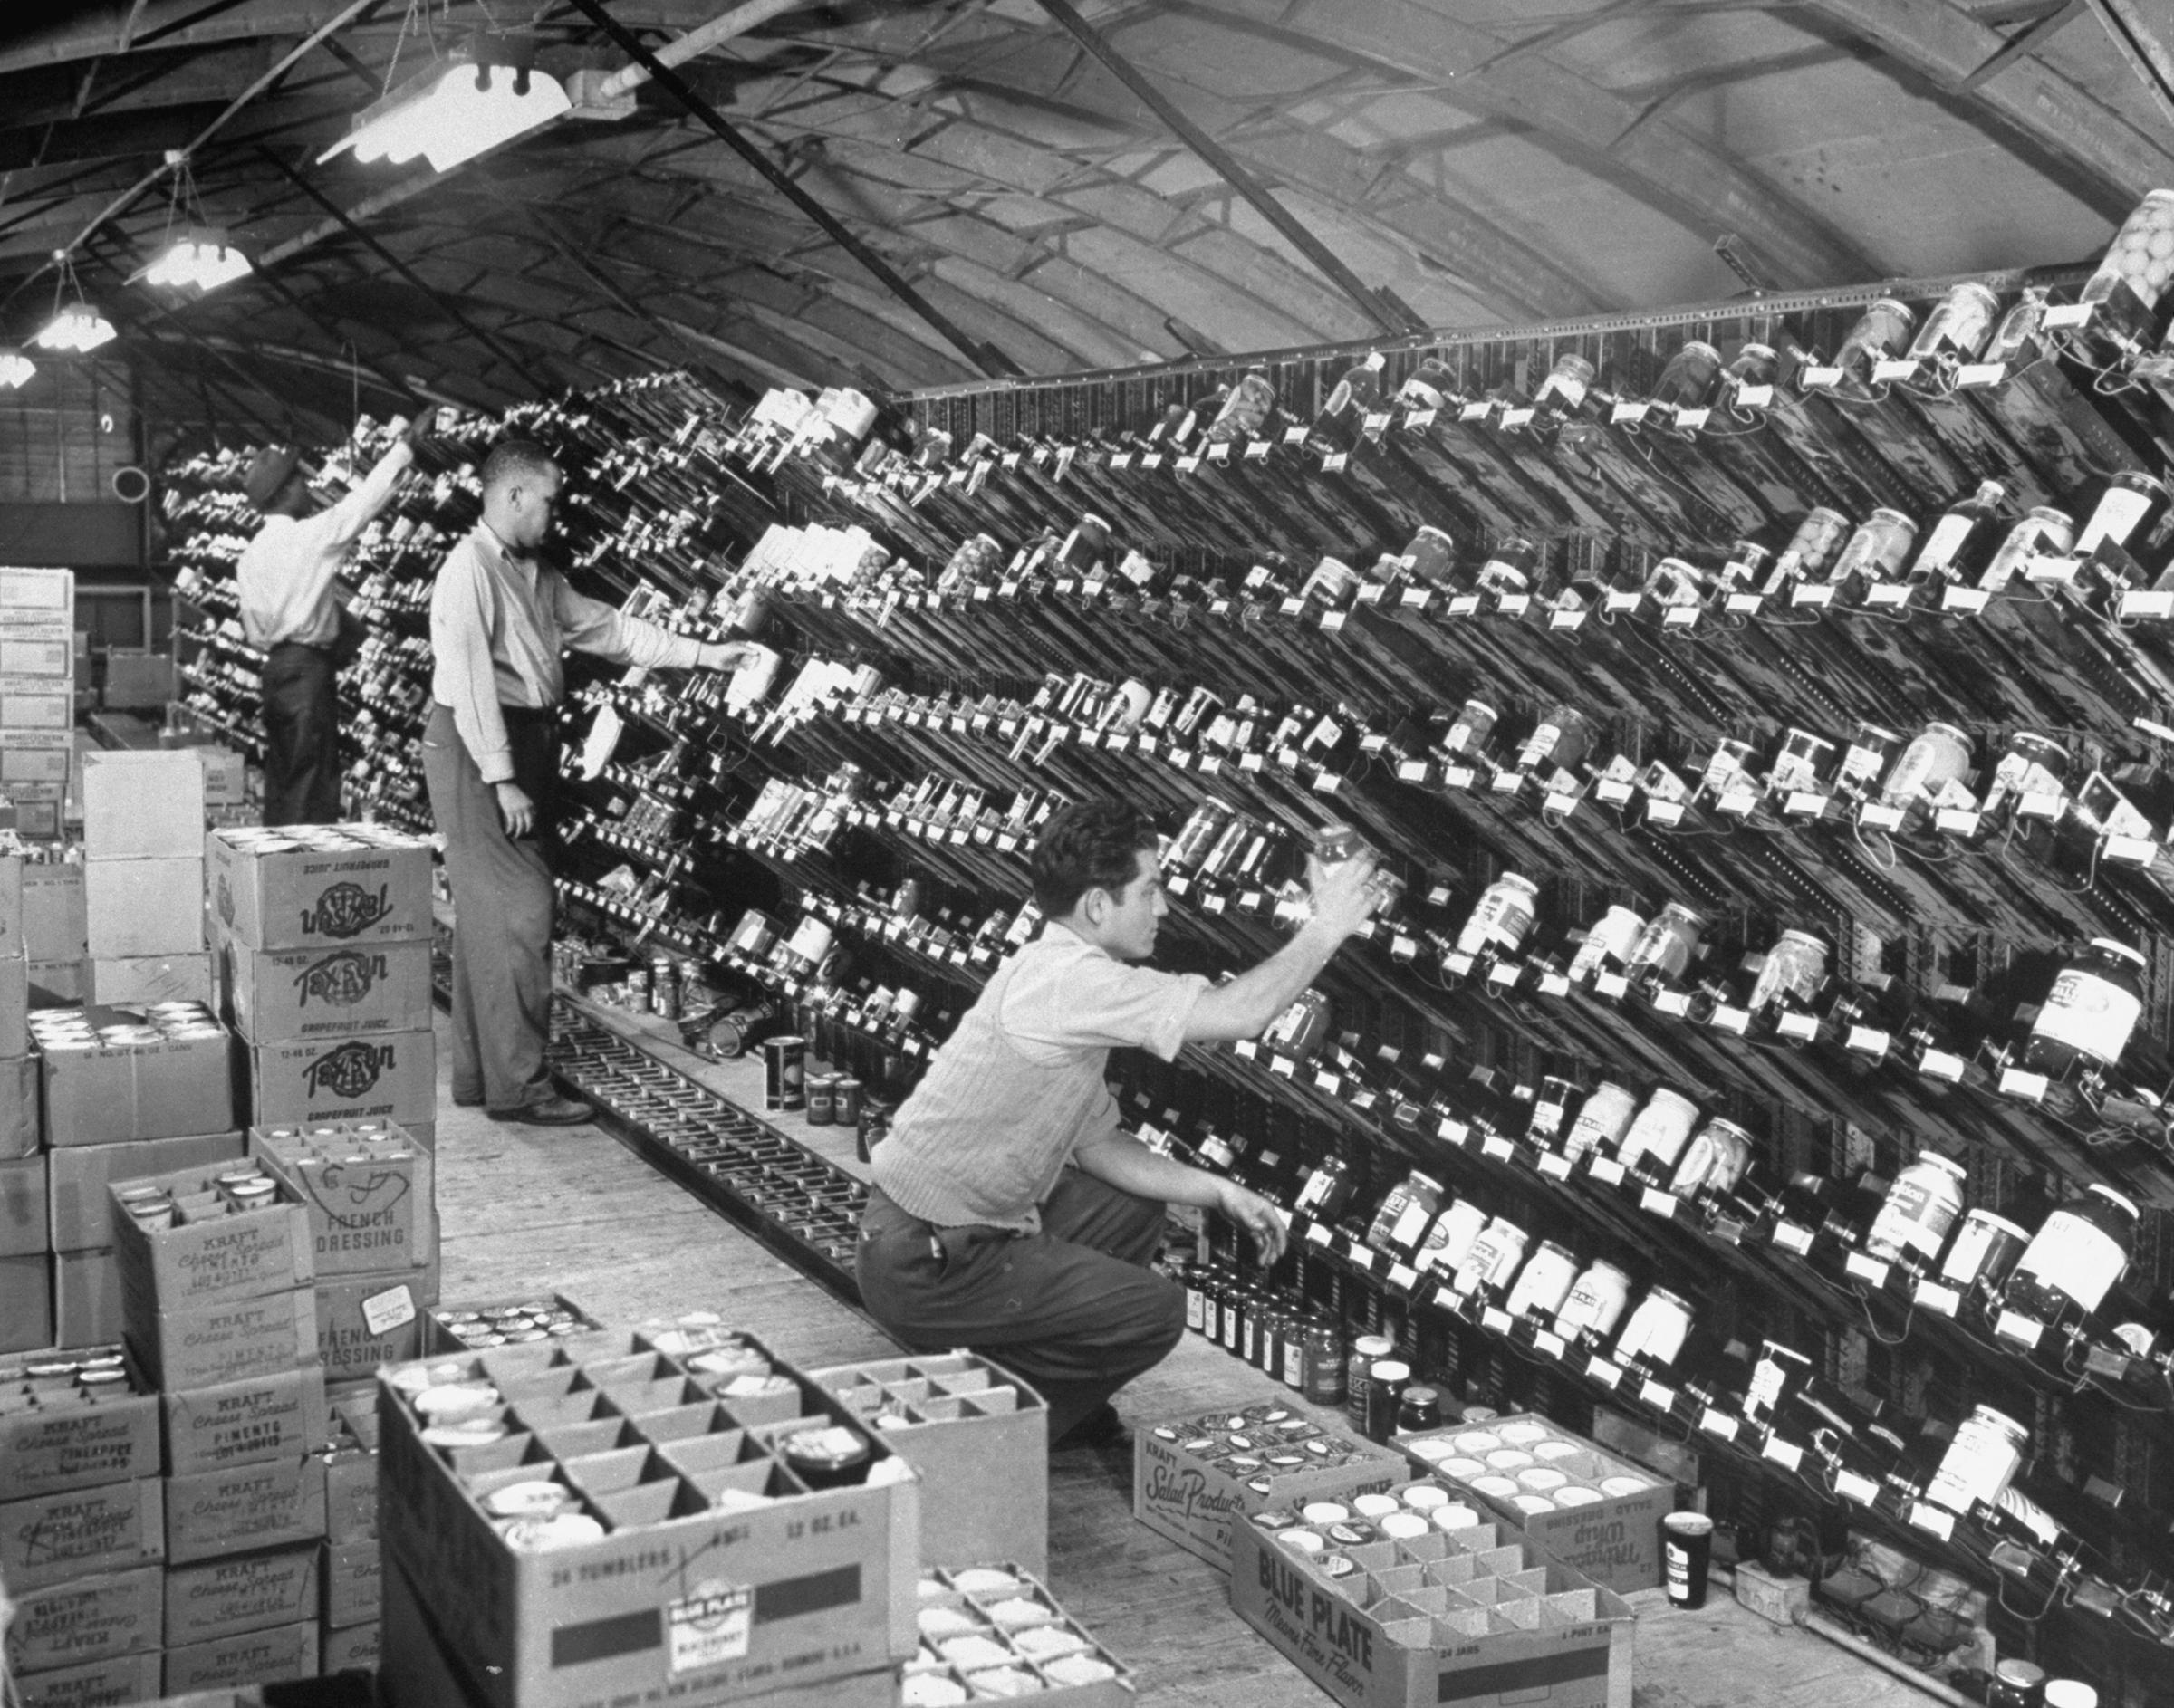 Keedoozle, a fully automated grocery store, Memphis, Tenn., 1948.